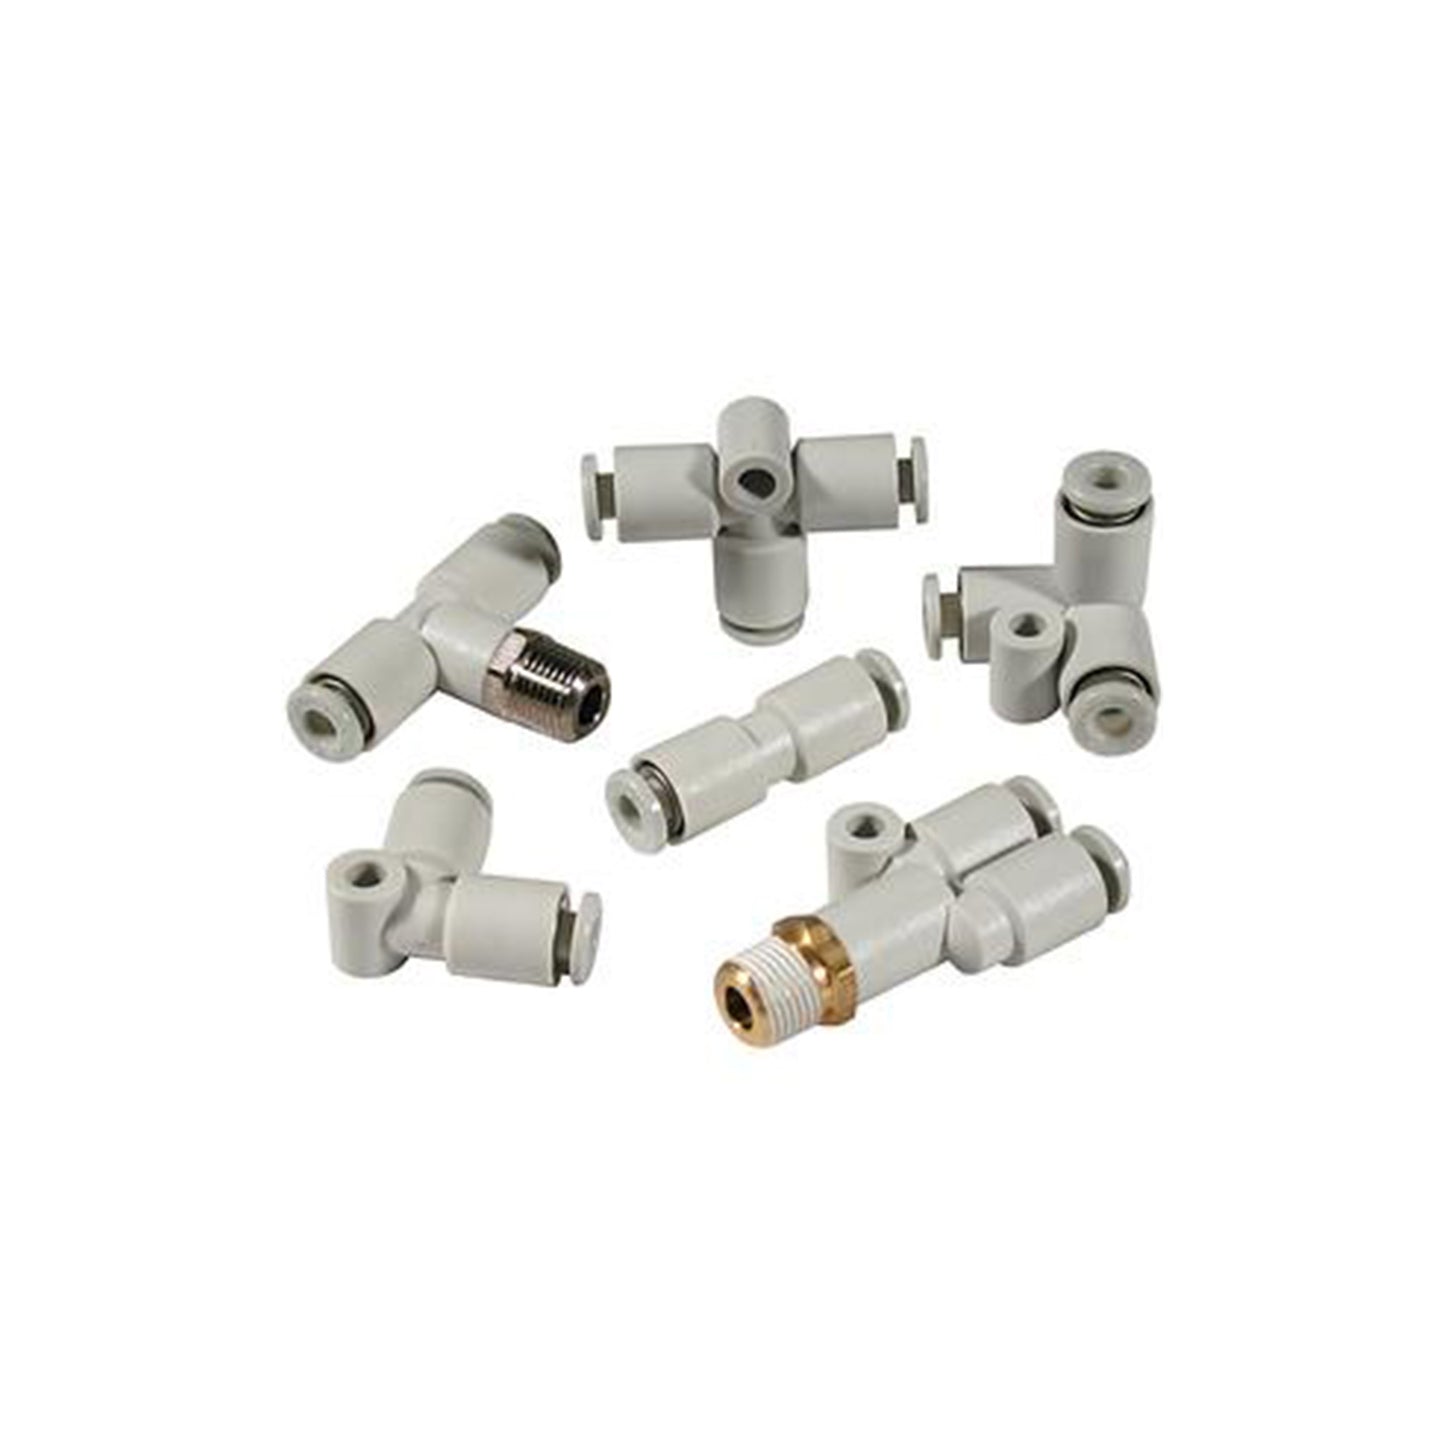 SMC KQ2H04-U01 | Unifit Male Connector Fitting